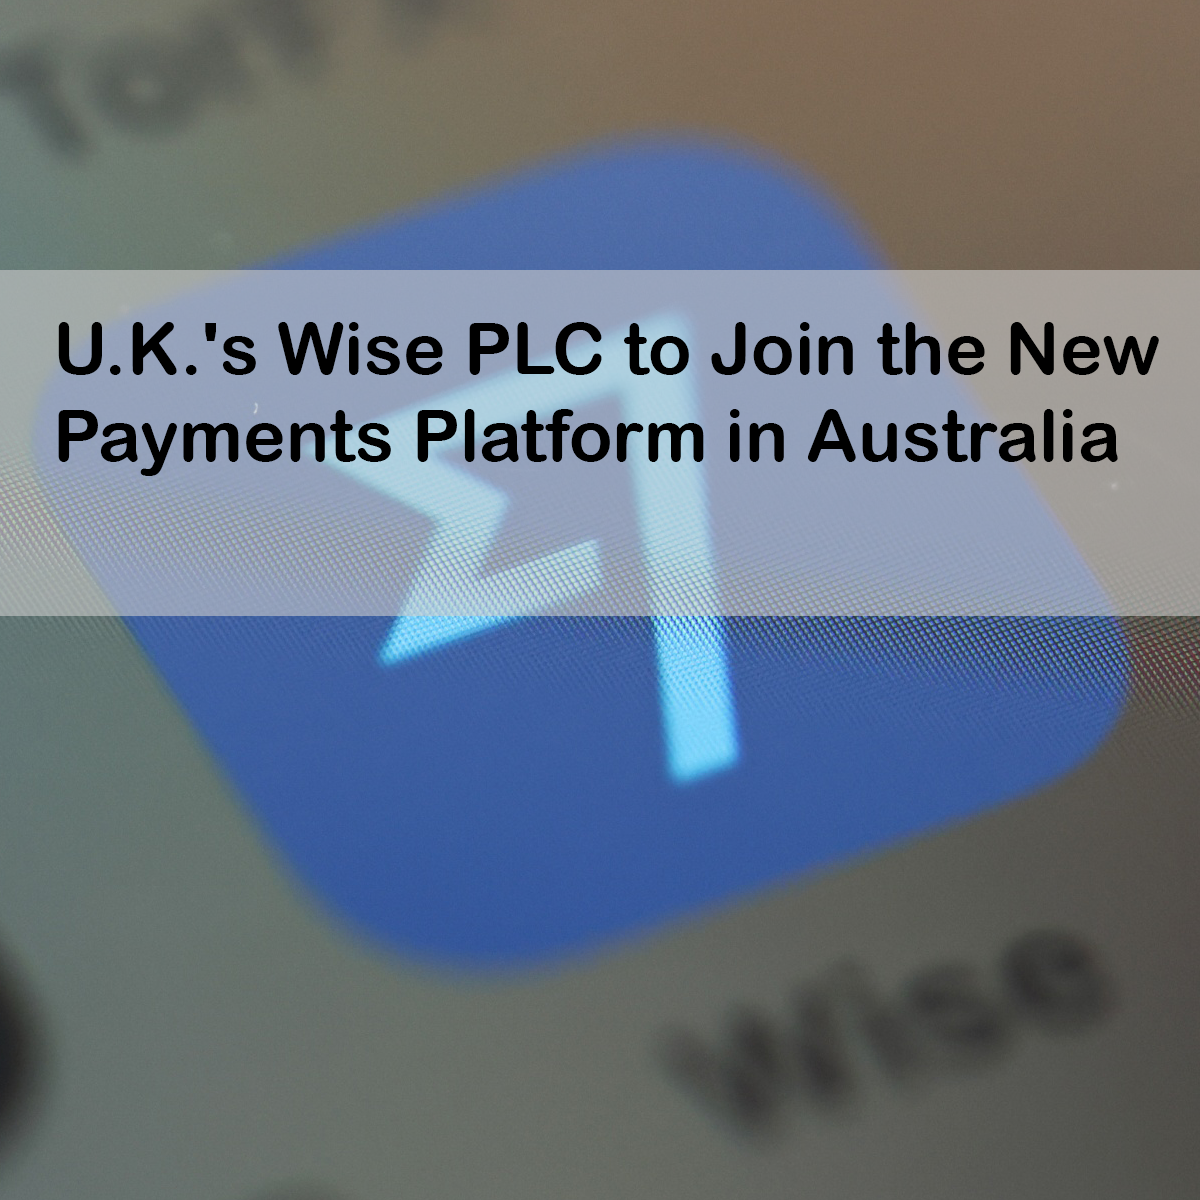 U.K.'s Wise PLC to Join the New Payments Platform in Australia